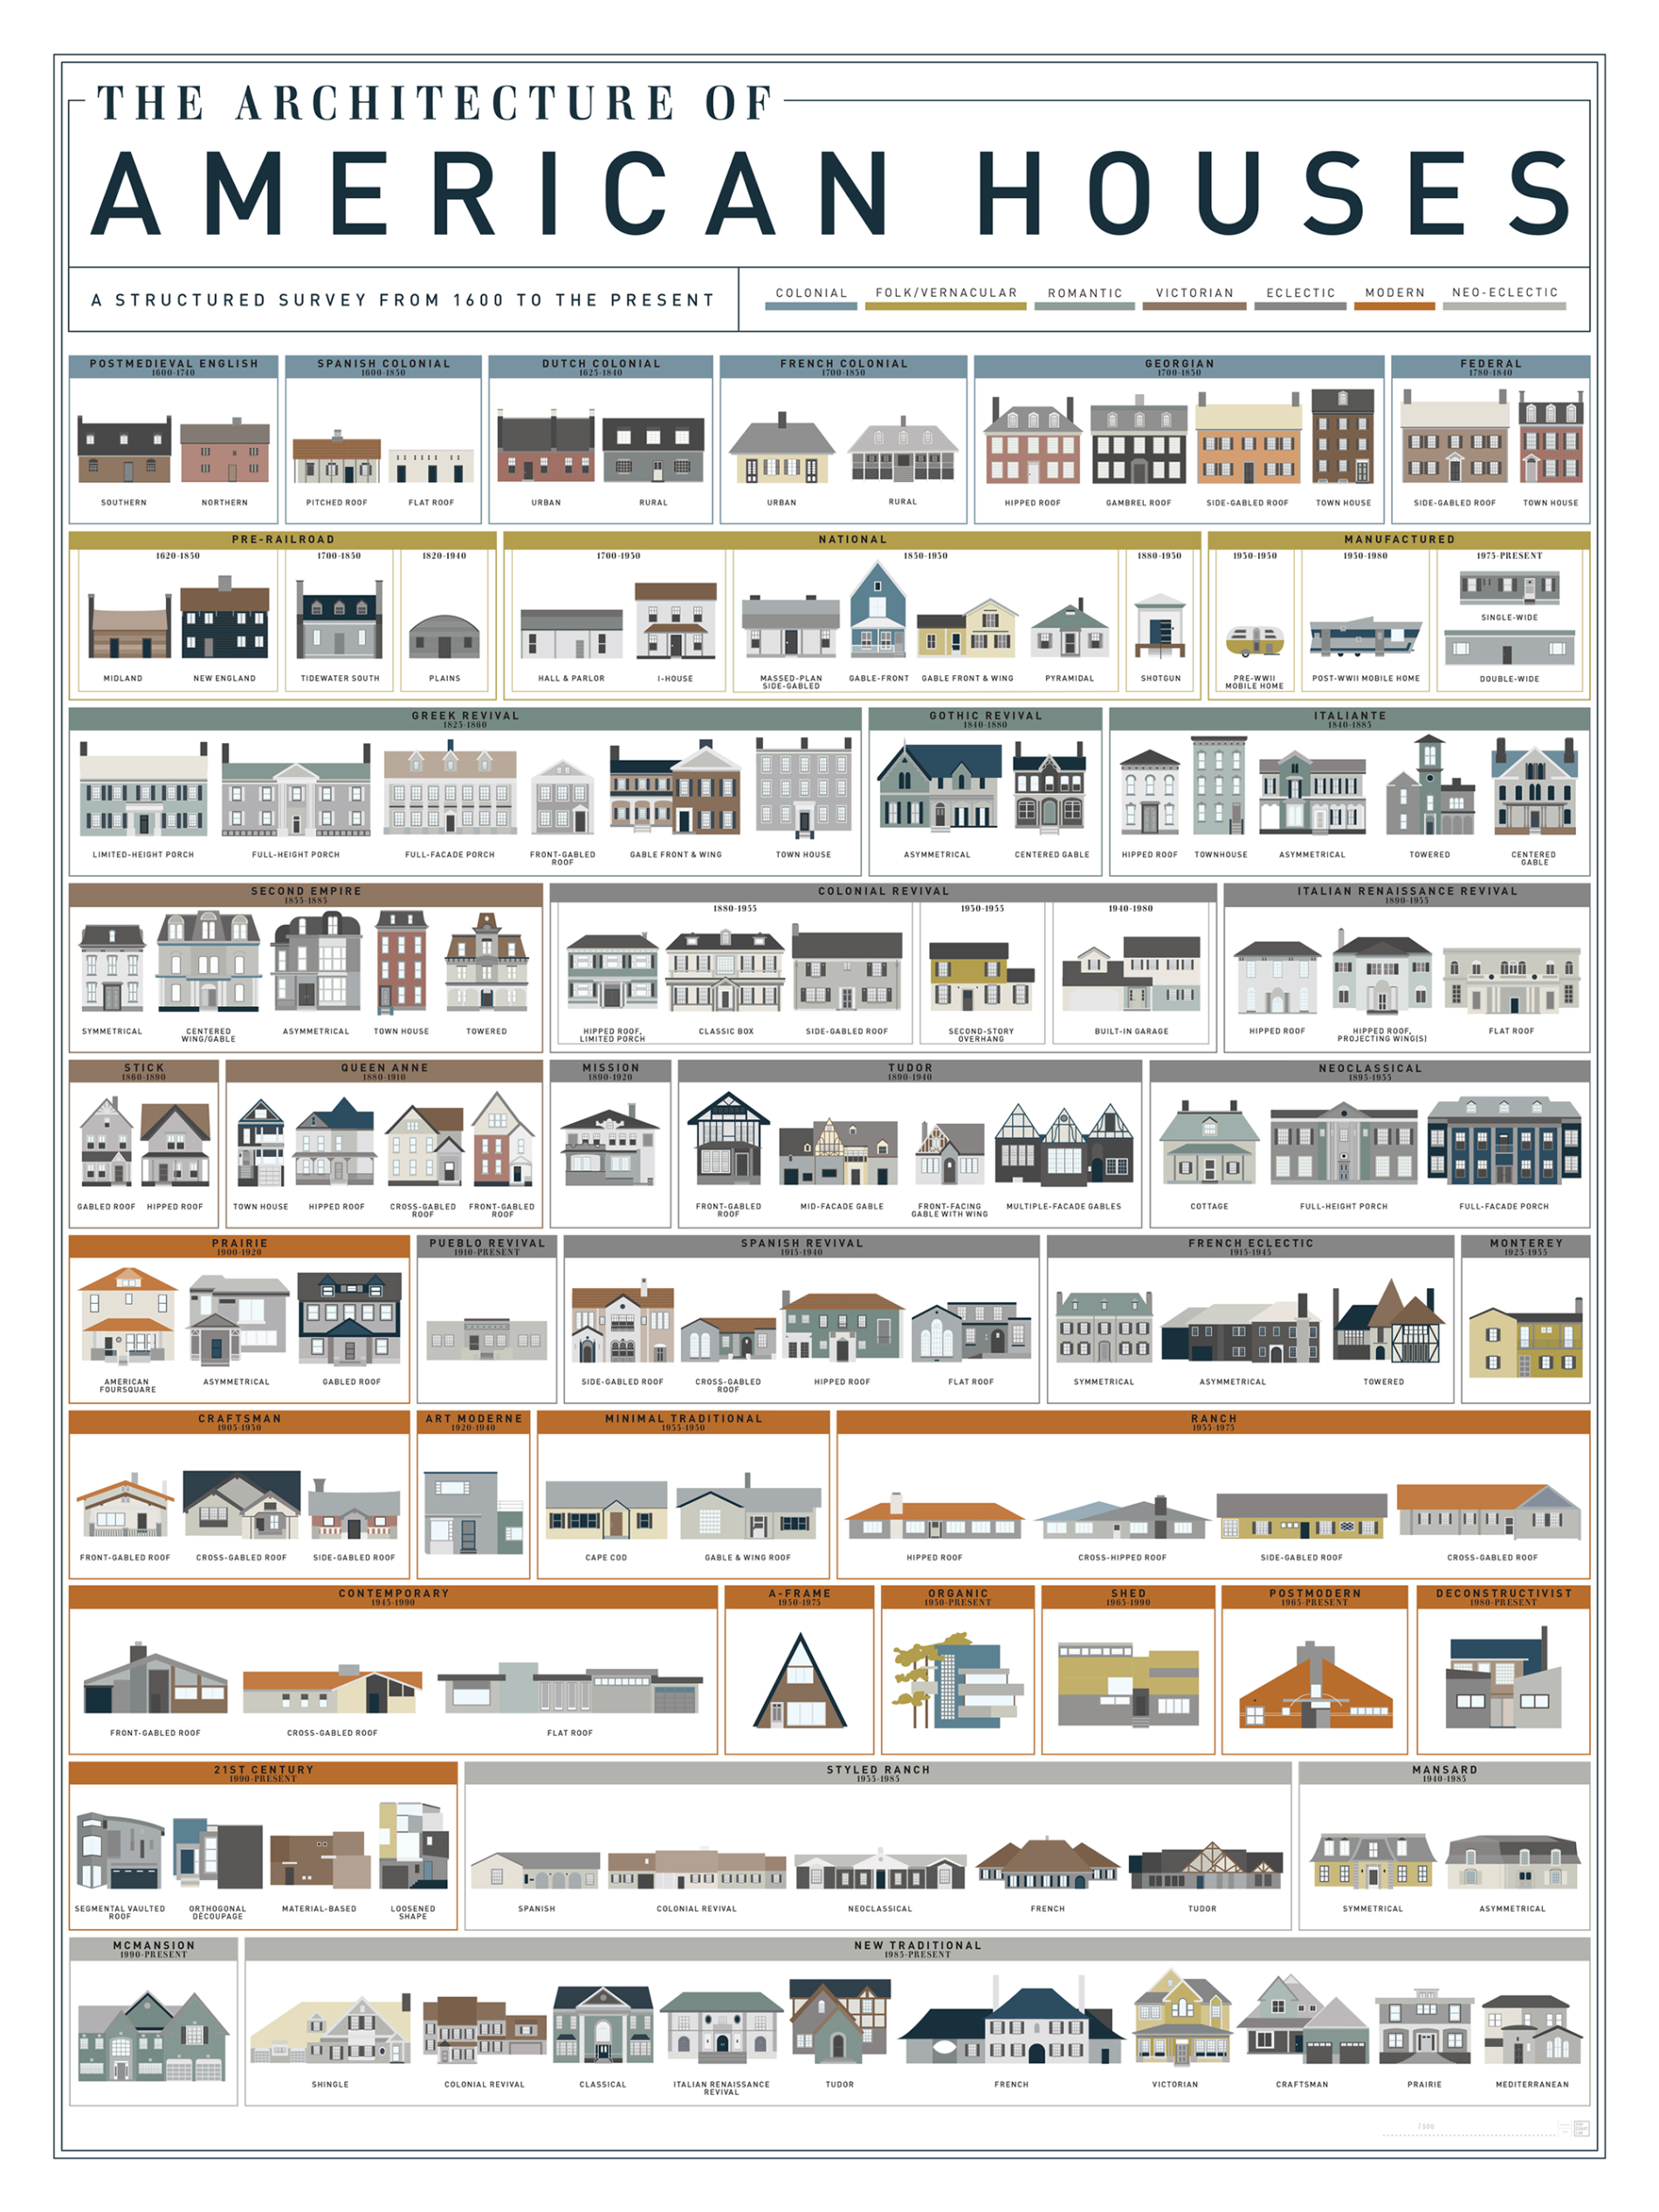 architectural design styles Bulan 2 What Style Is That House? Visual Guides to Domestic Architectural